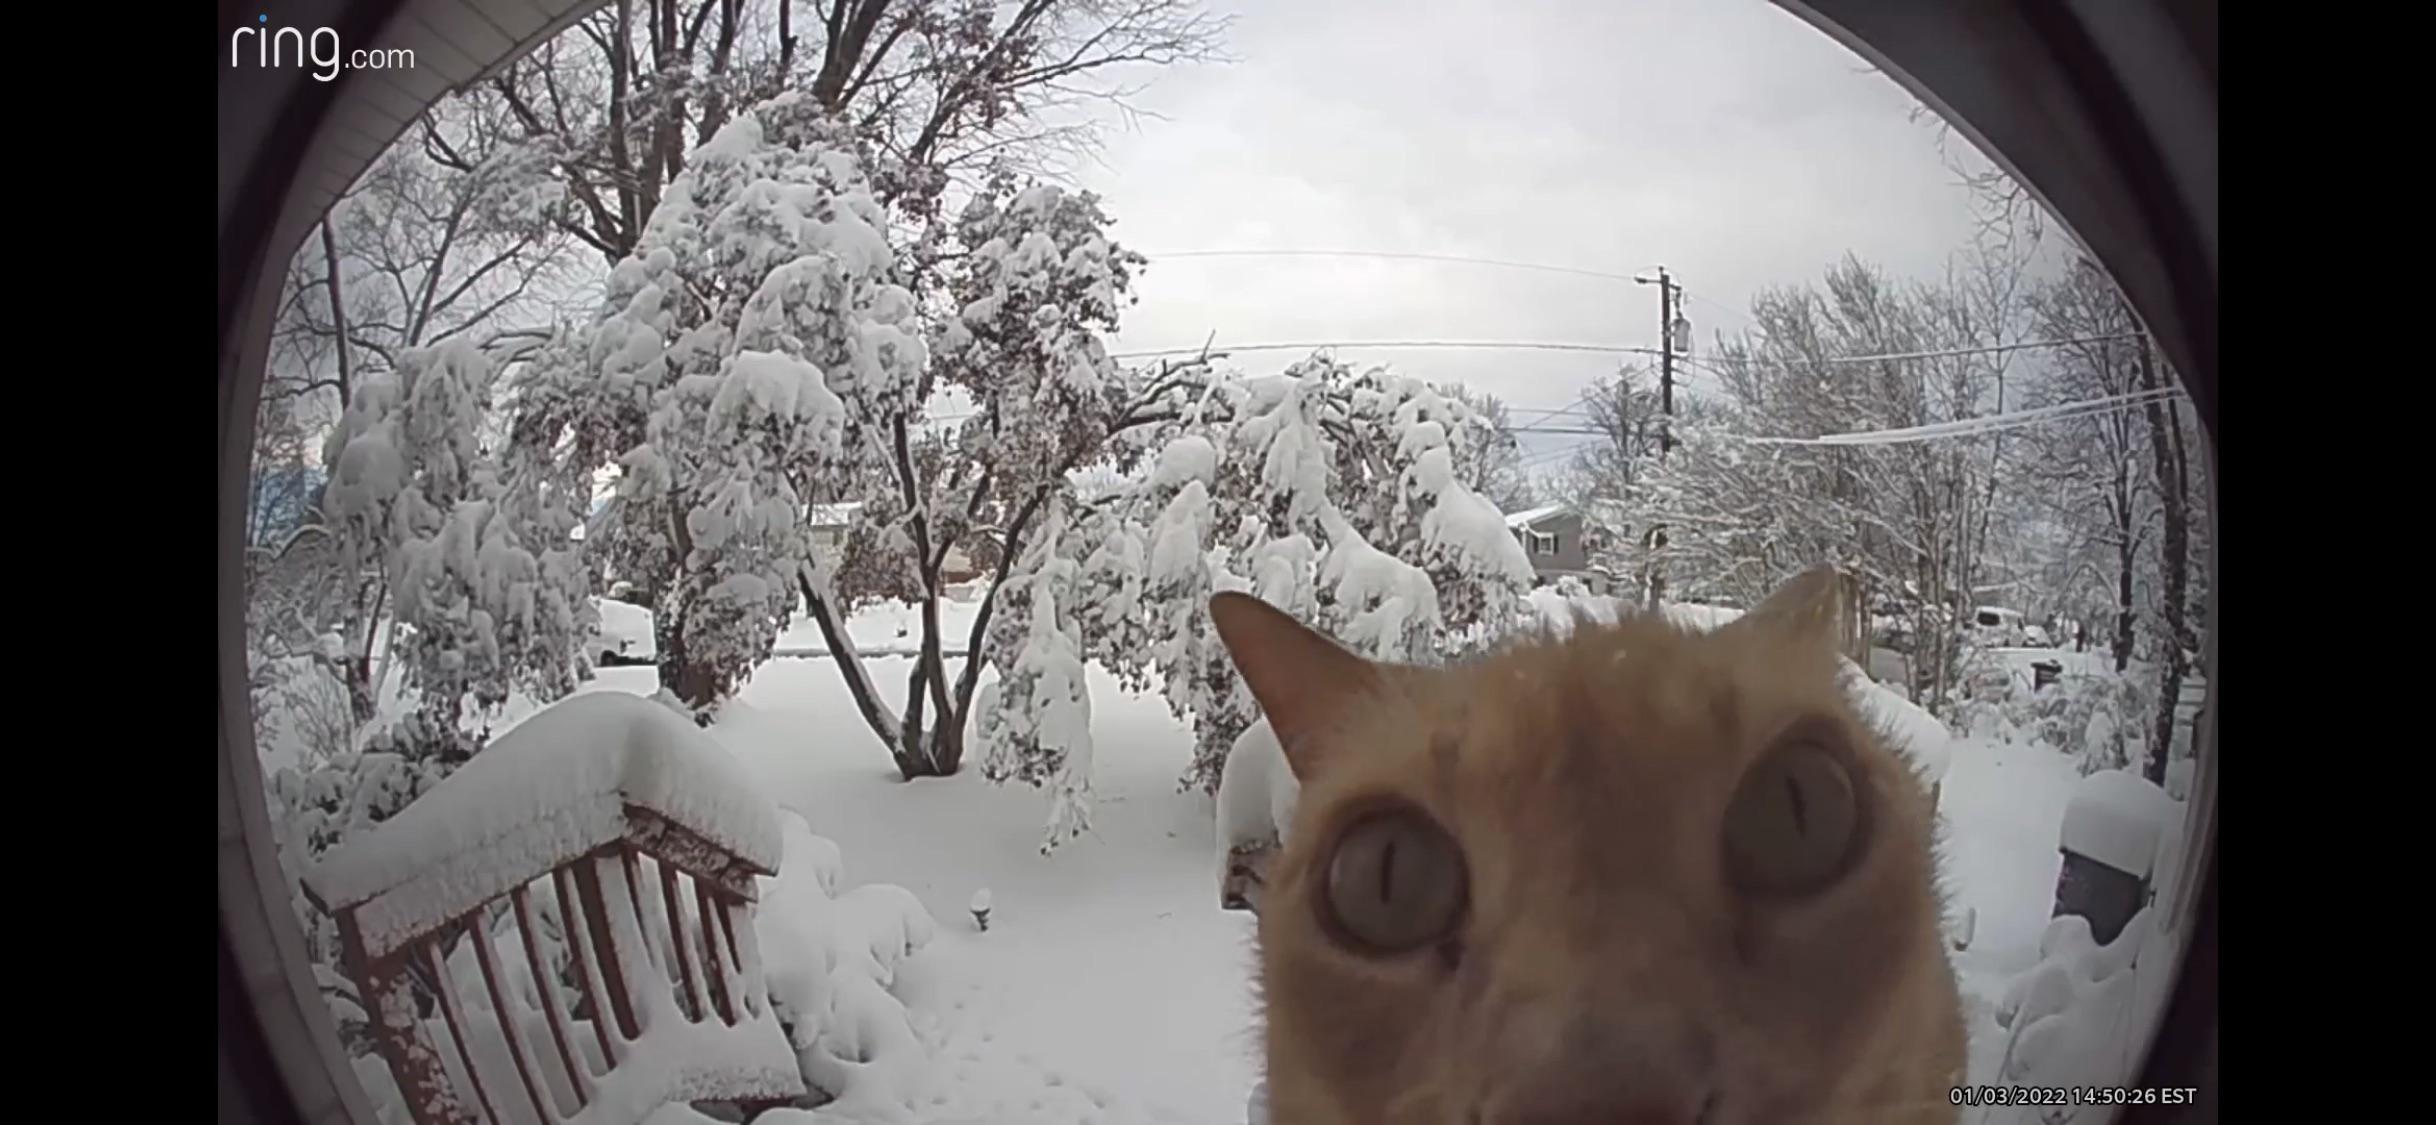 orange cat peering into camera of Ring doorbell. snow on the ground and trees can be seen behind the cat.